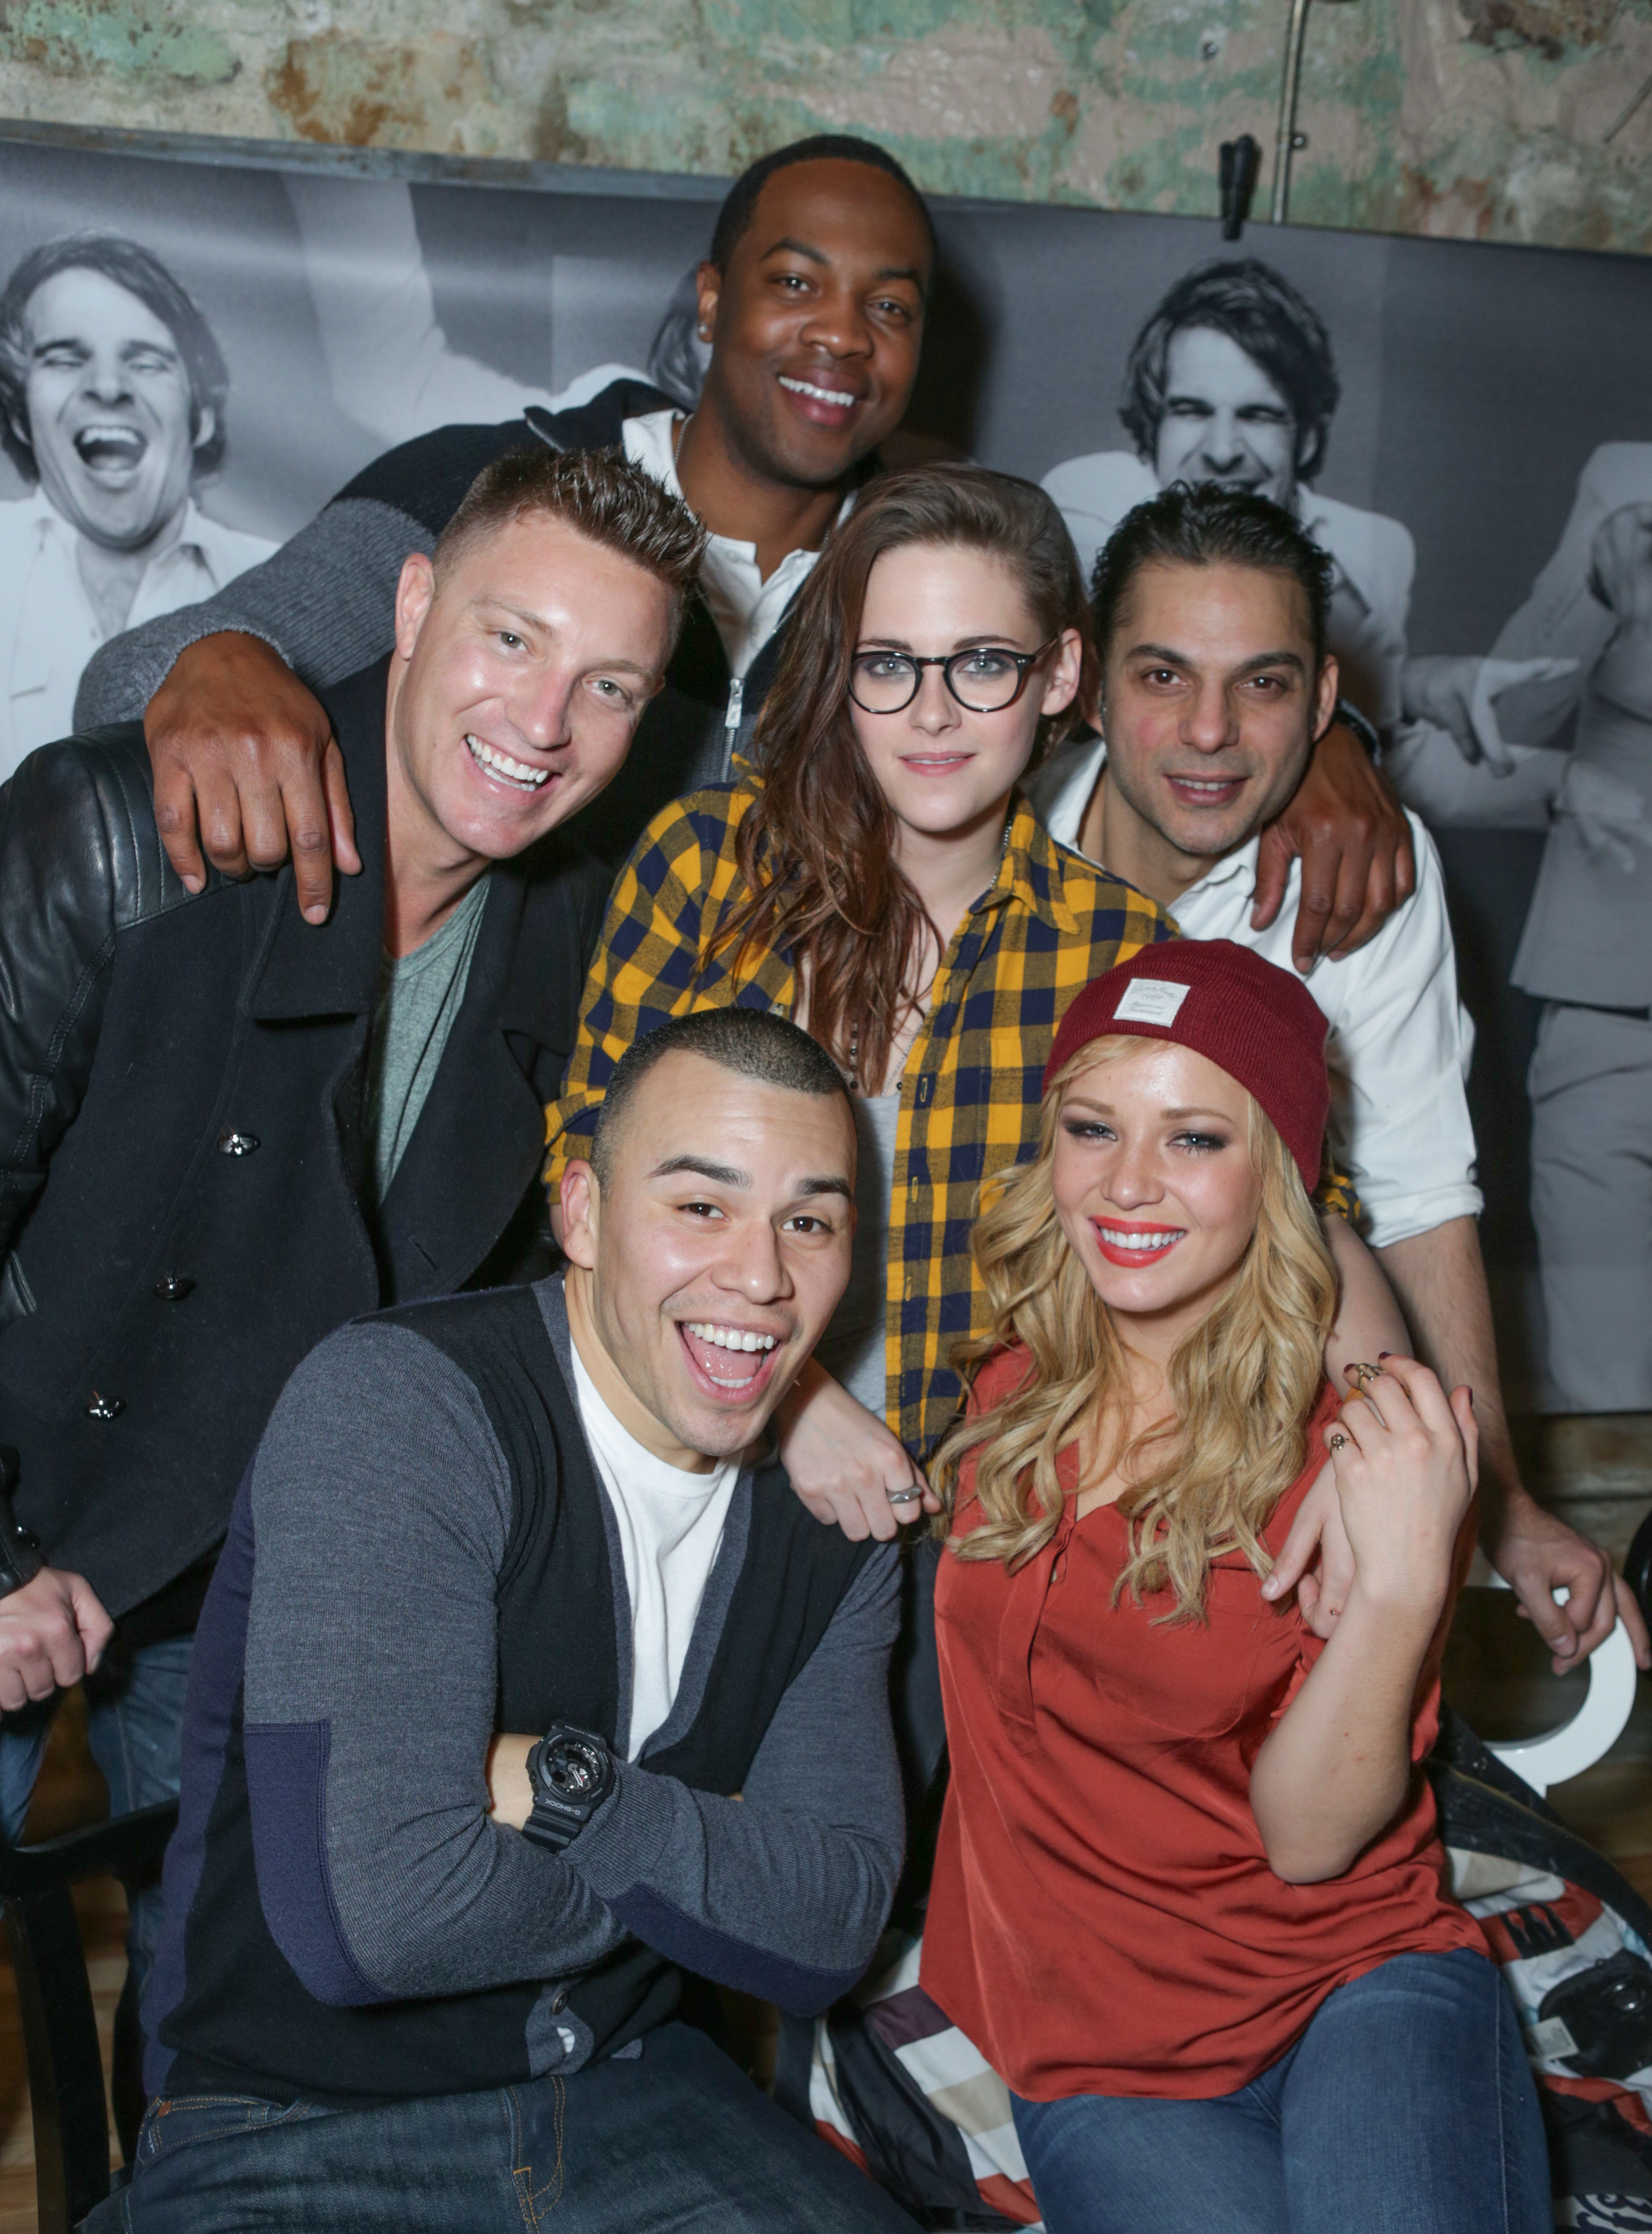 Actors Ser'Darius Blain, Lane Garrison, Kristen Stewart, Peyman Moaadi, JJ Soria and Tara Holt attend ChefDance presented by Bravo's Top Chef Sponsored by SUJA Juices, El Tesoro De Don Filipe Tequila & United Airlines on January 17, 2014 in Park City, Utah.  (Photo by Tiffany Rose/Getty Images for ChefDance)